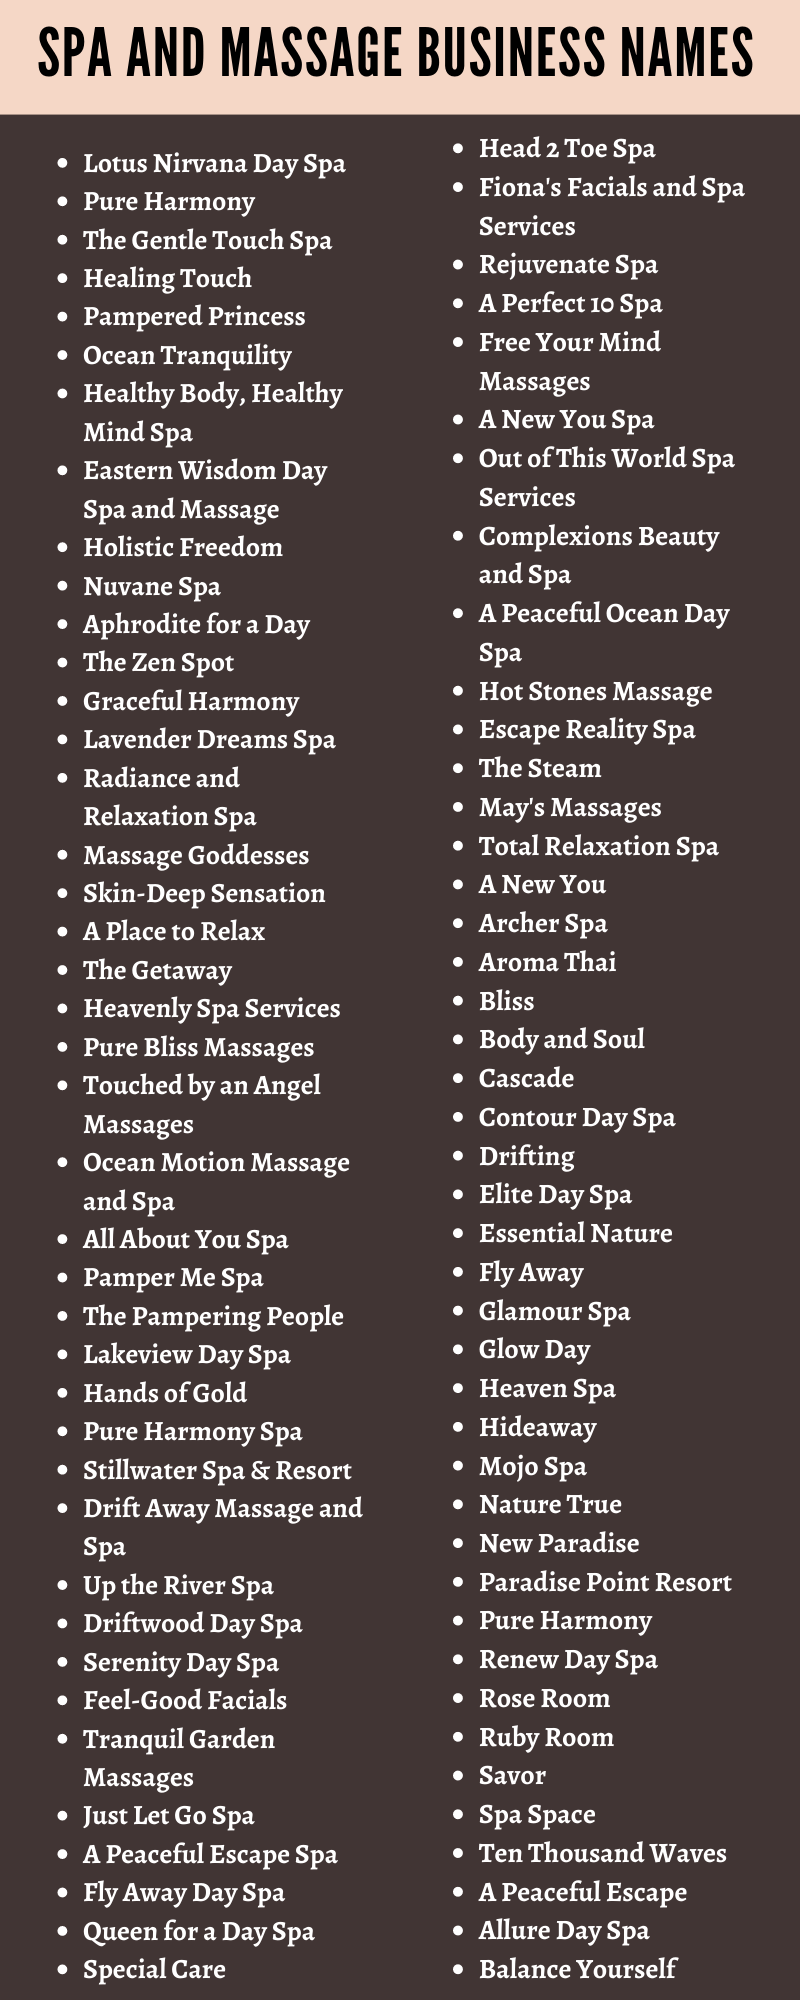 Spa and Massage Business Names 